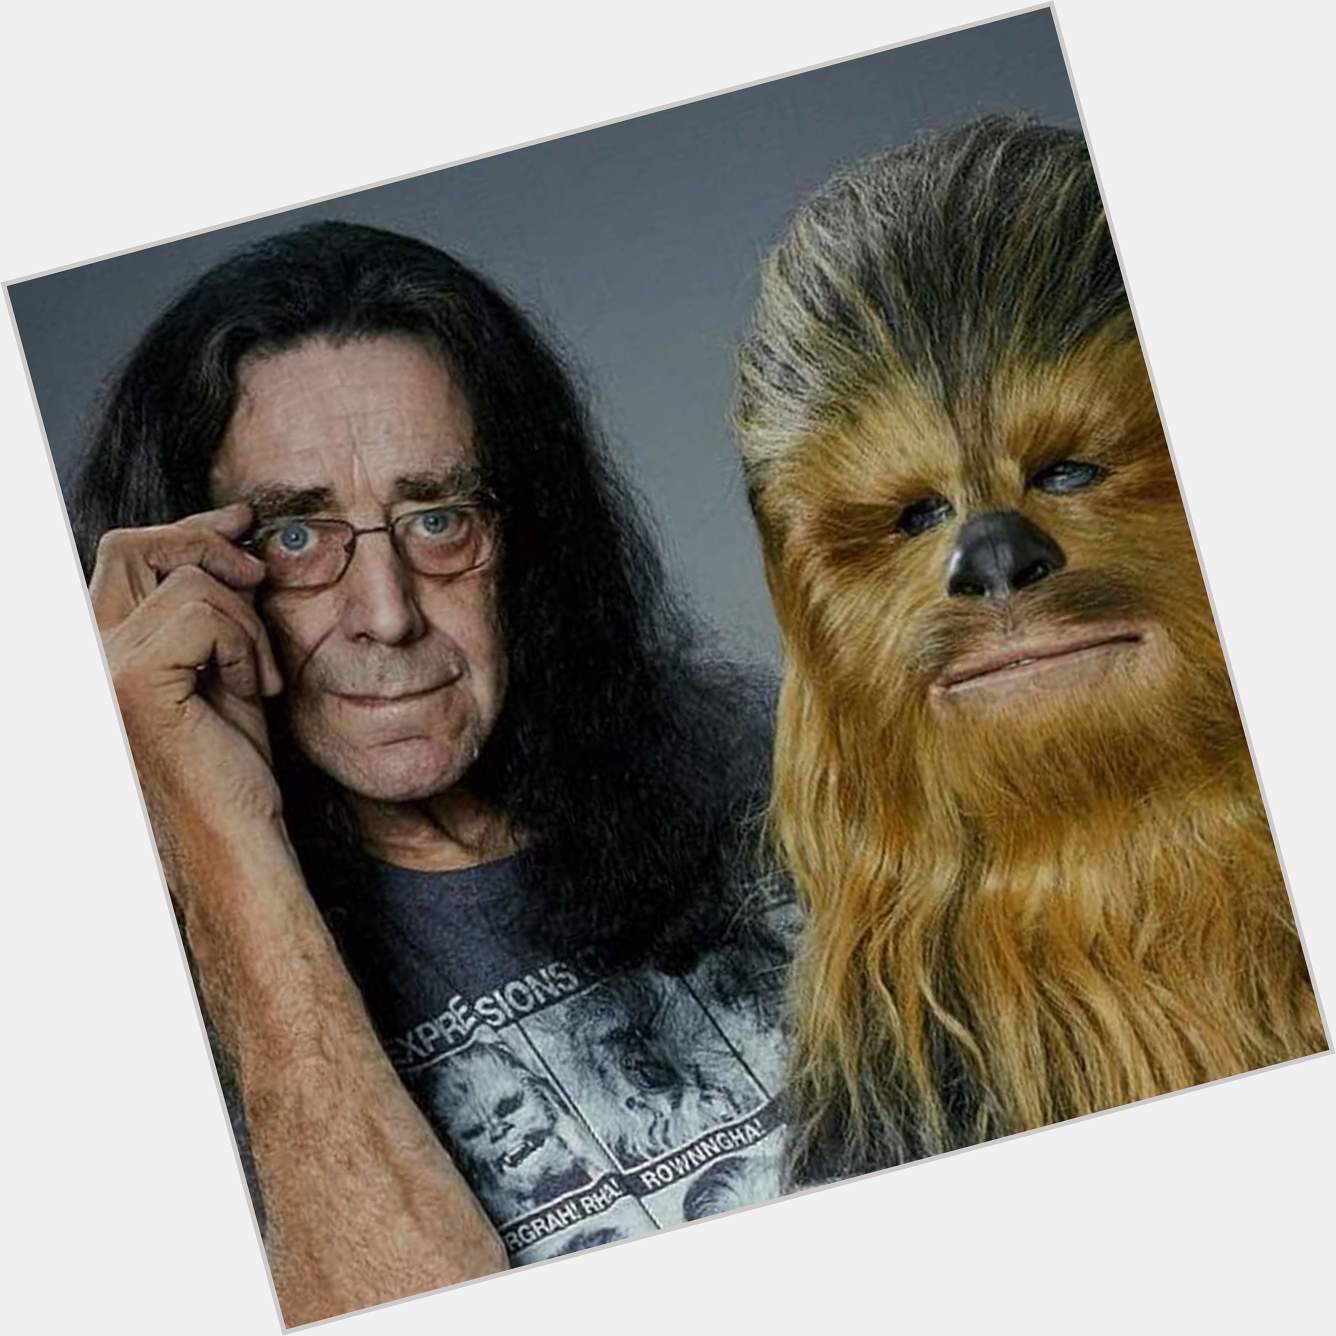 Happy Birthday Memories to the late, great Peter Mayhew. 
Born on May 19th, 1944 